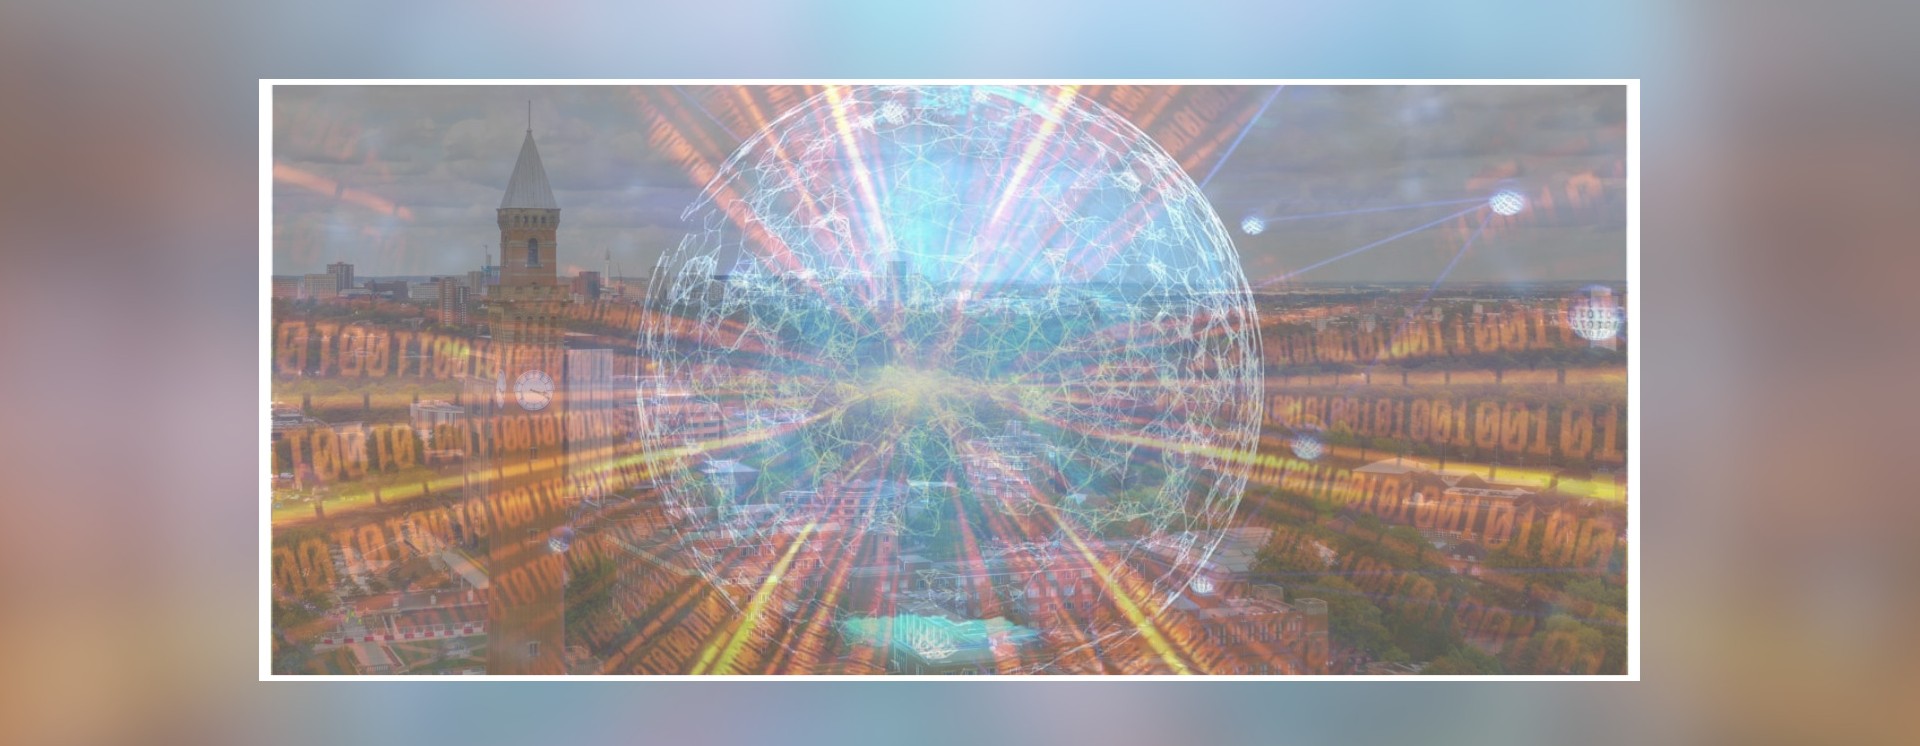 Image of the campus overlaid with blurred quantum coding.